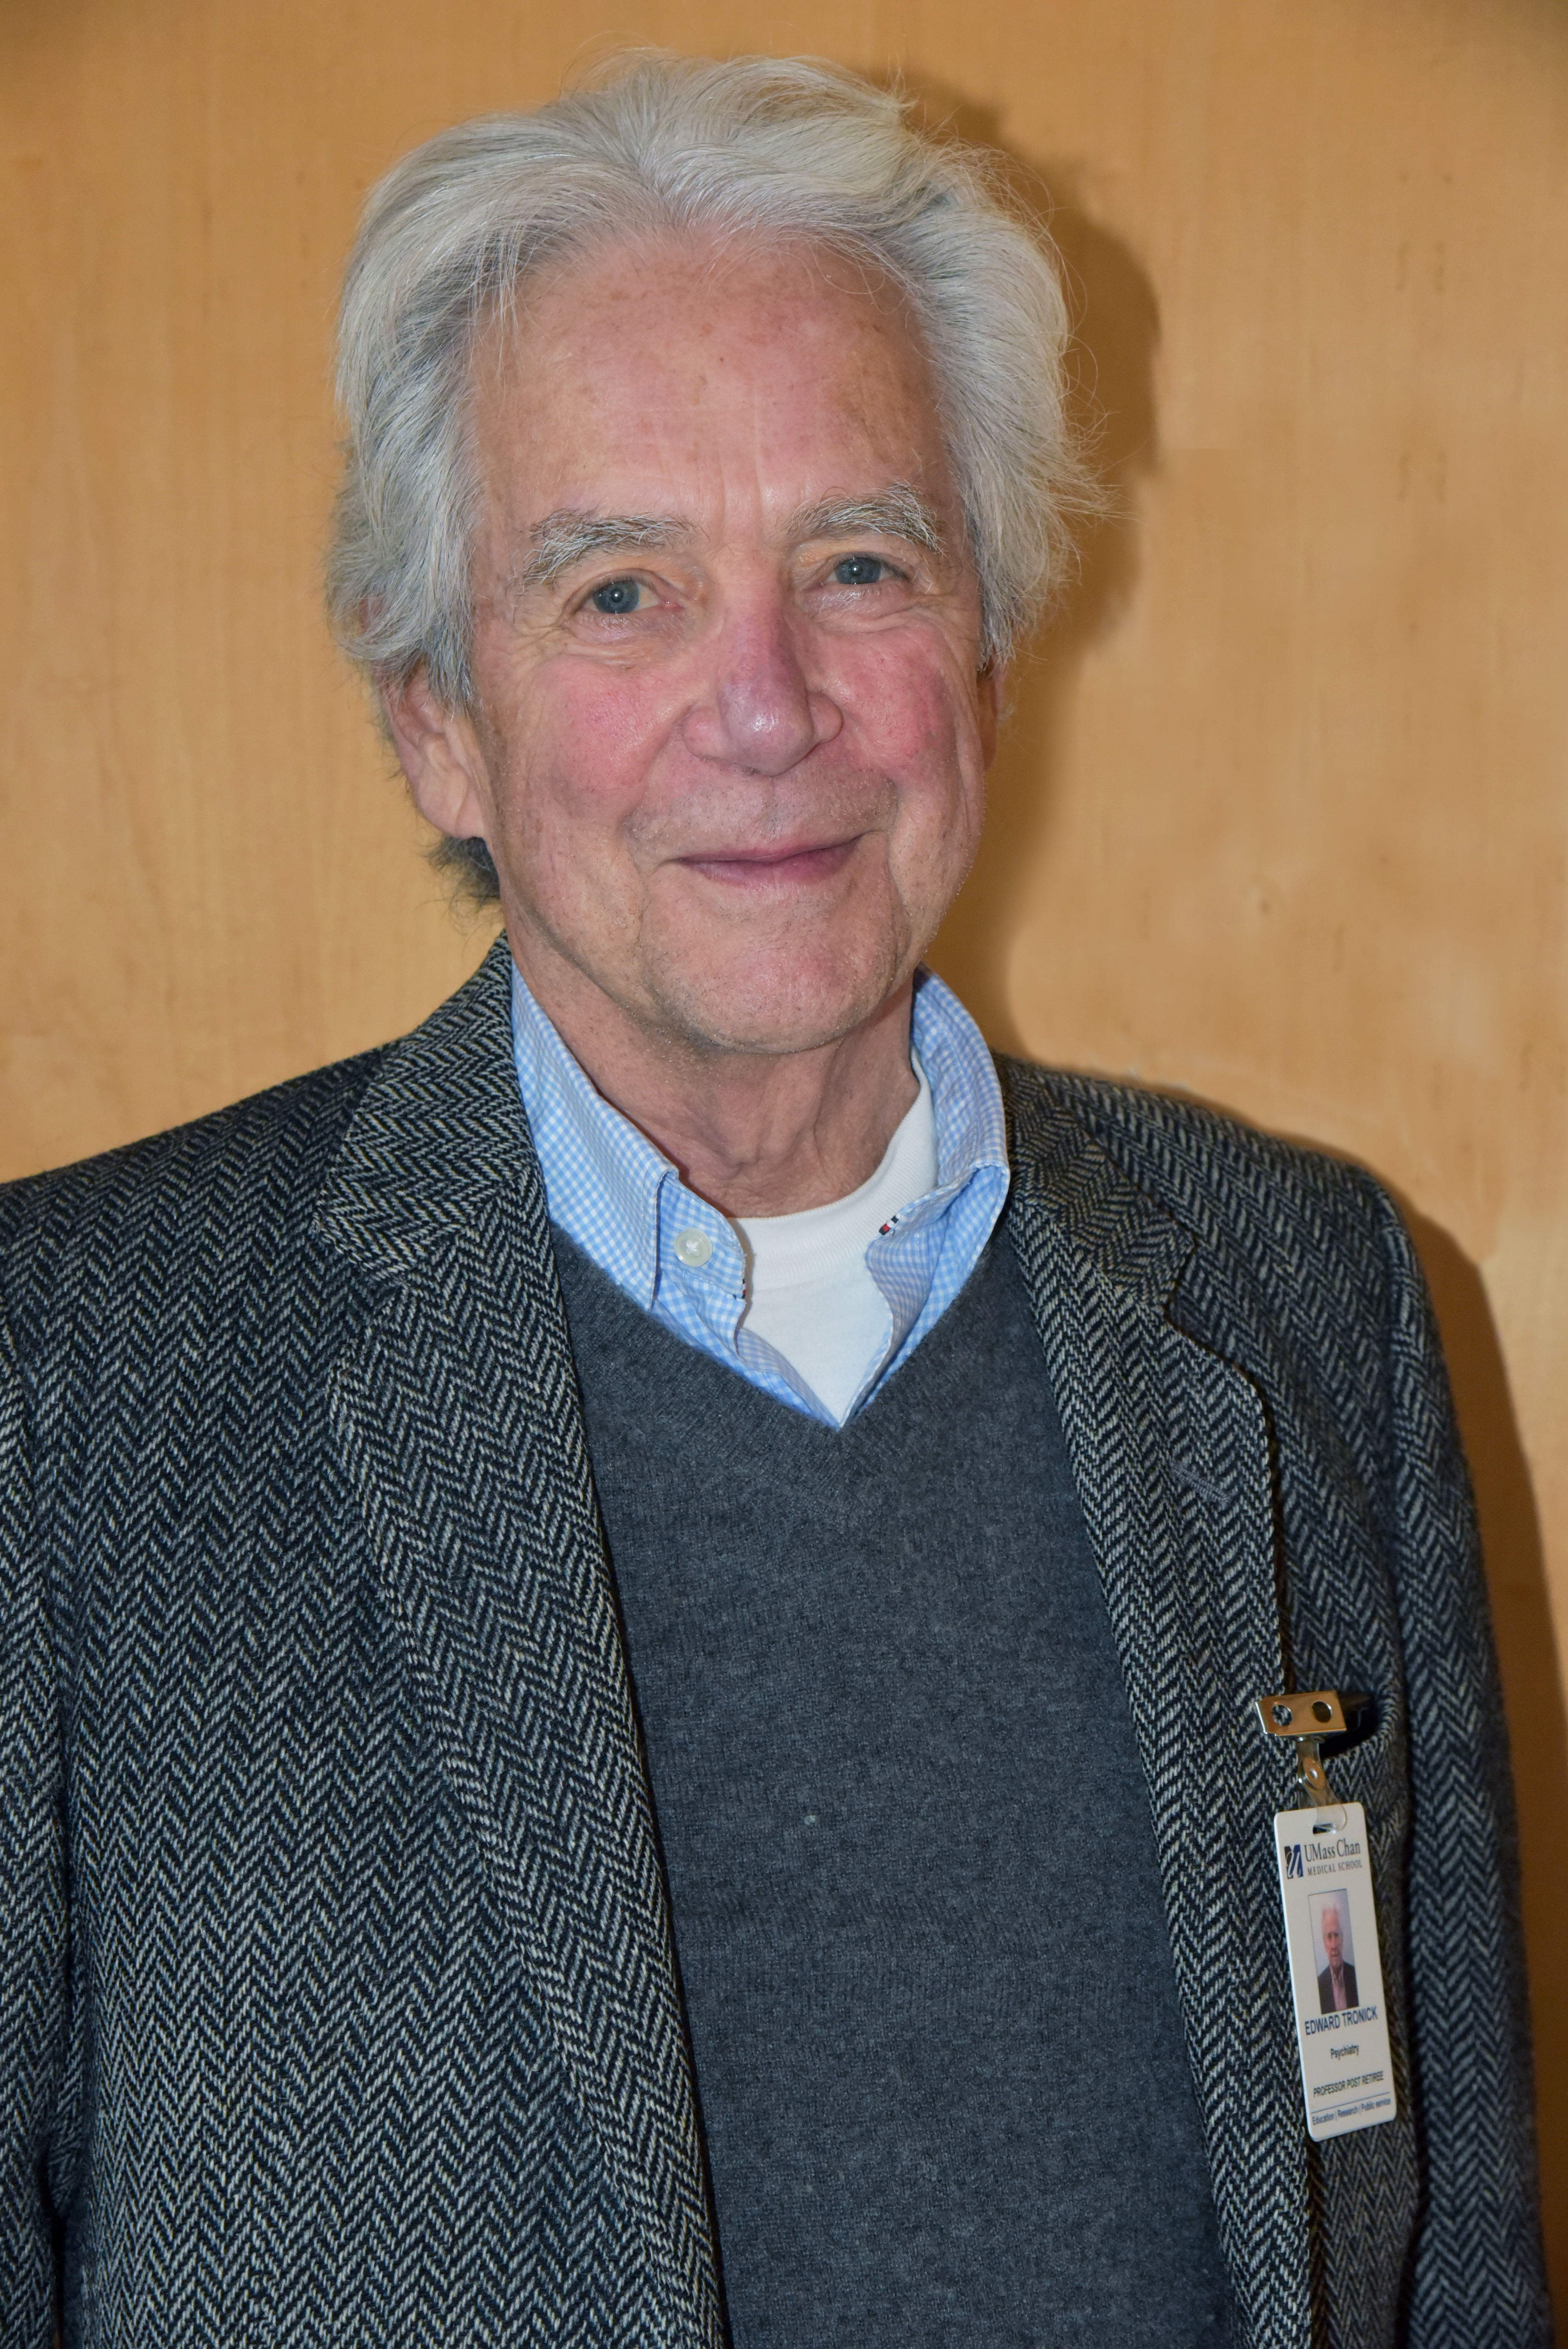 Ed Tronick, Chief Faculty